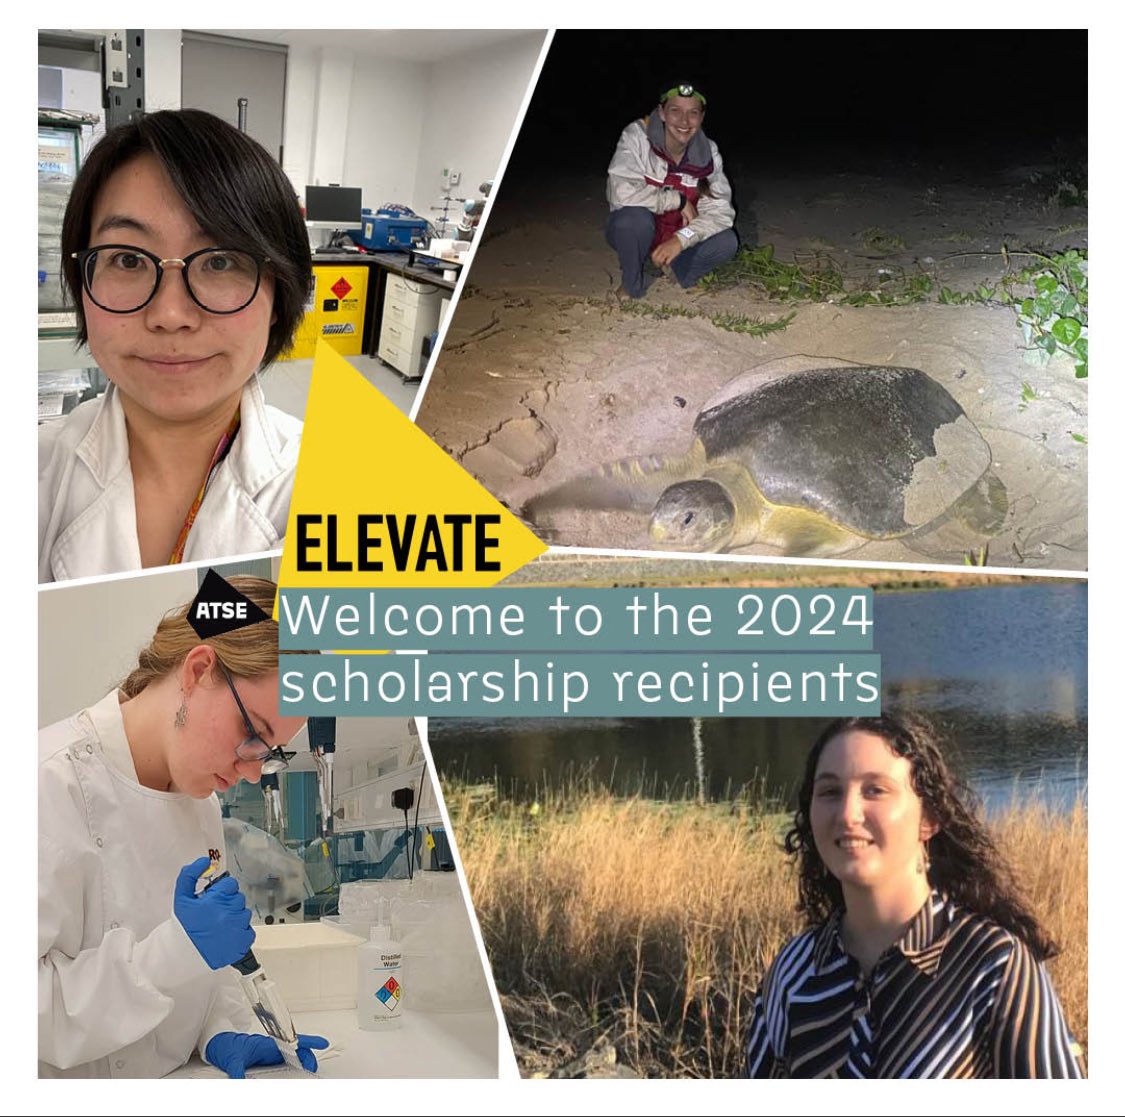 It’s exciting to see 116 #ElevateSTEM scholarships offered to 74 undergrad students & 32 postgrad STEM scholars.
We are proud to be an Elevate program partner & look forward to supporting & empowering the 2024 #womeninSTEMM Elevate cohort to thrive & reach their full potential.